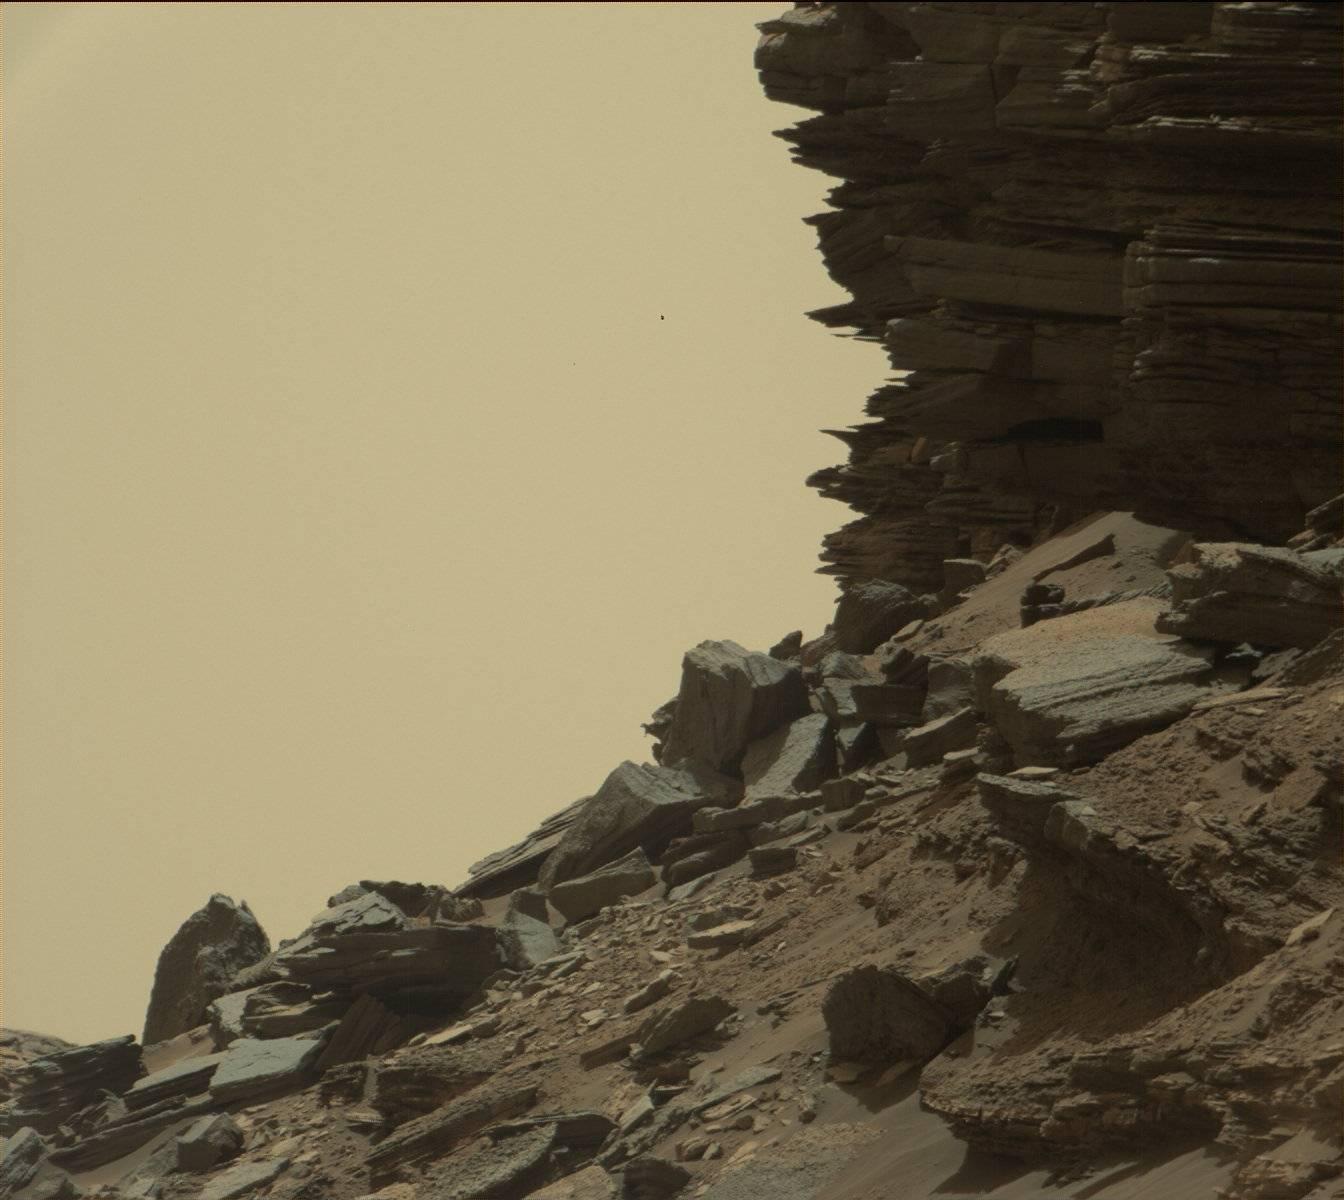 This view from Curiosity shows a dramatic hillside outcrop with sandstone layers that scientists refer to as  cross-bedding.